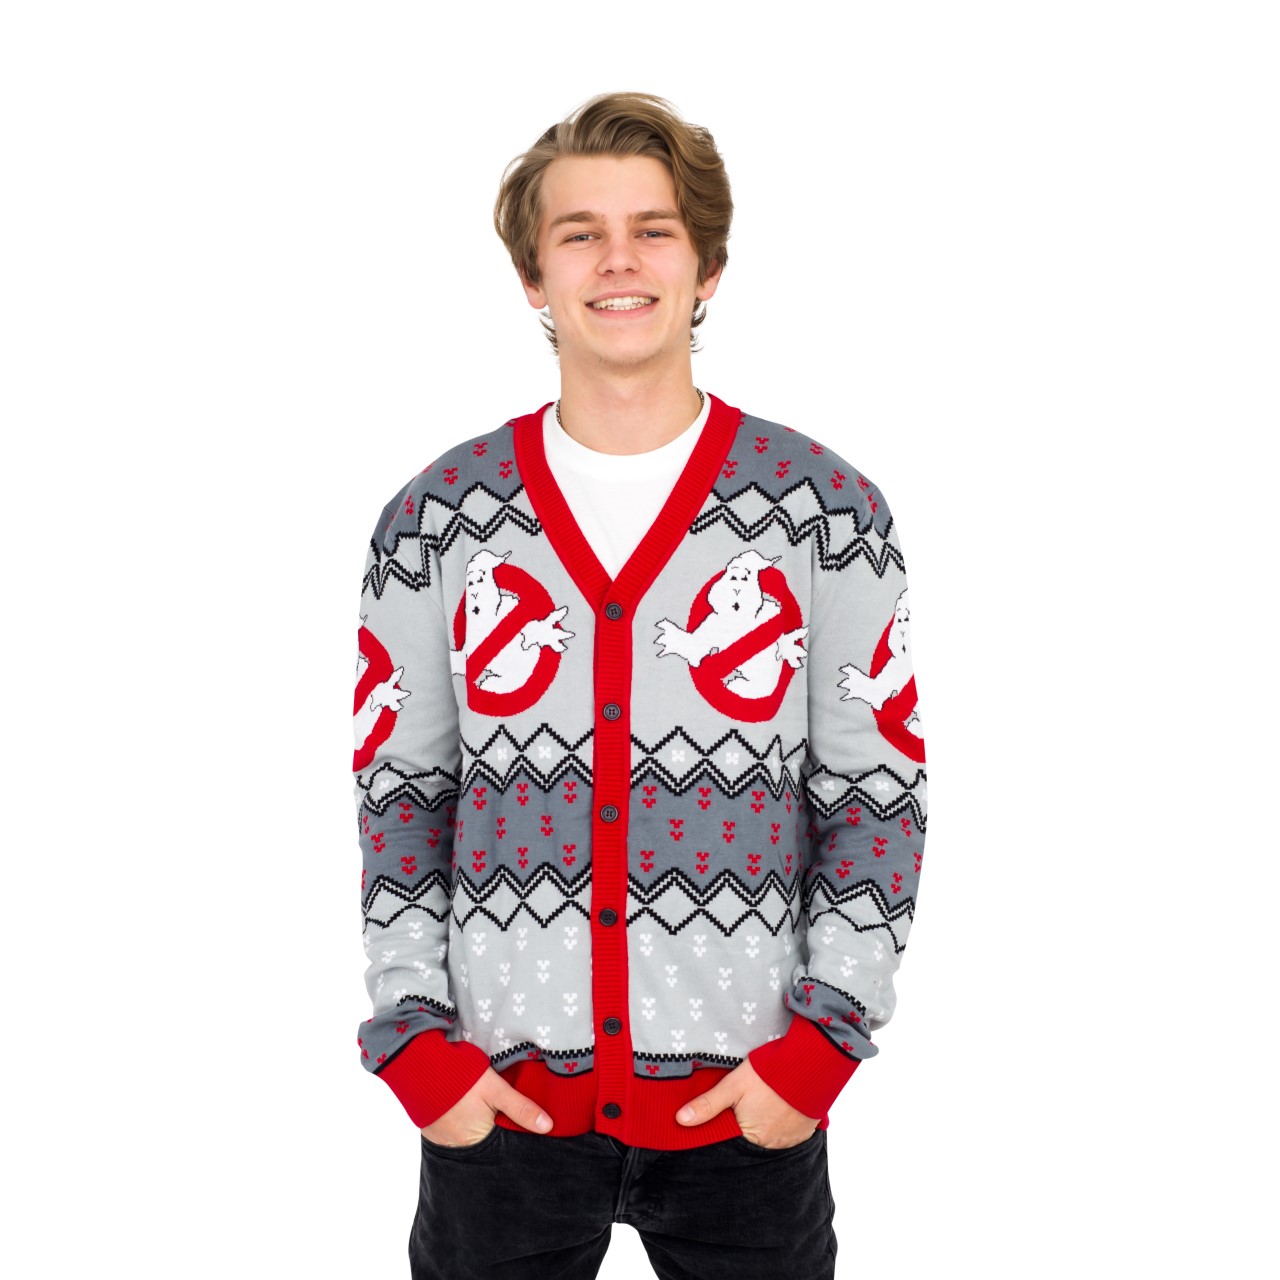 Ghostbusters Logo Ugly Christmas Cardigan Sweater,Ugly Christmas Sweaters | Funny Xmas Sweaters for Men and Women